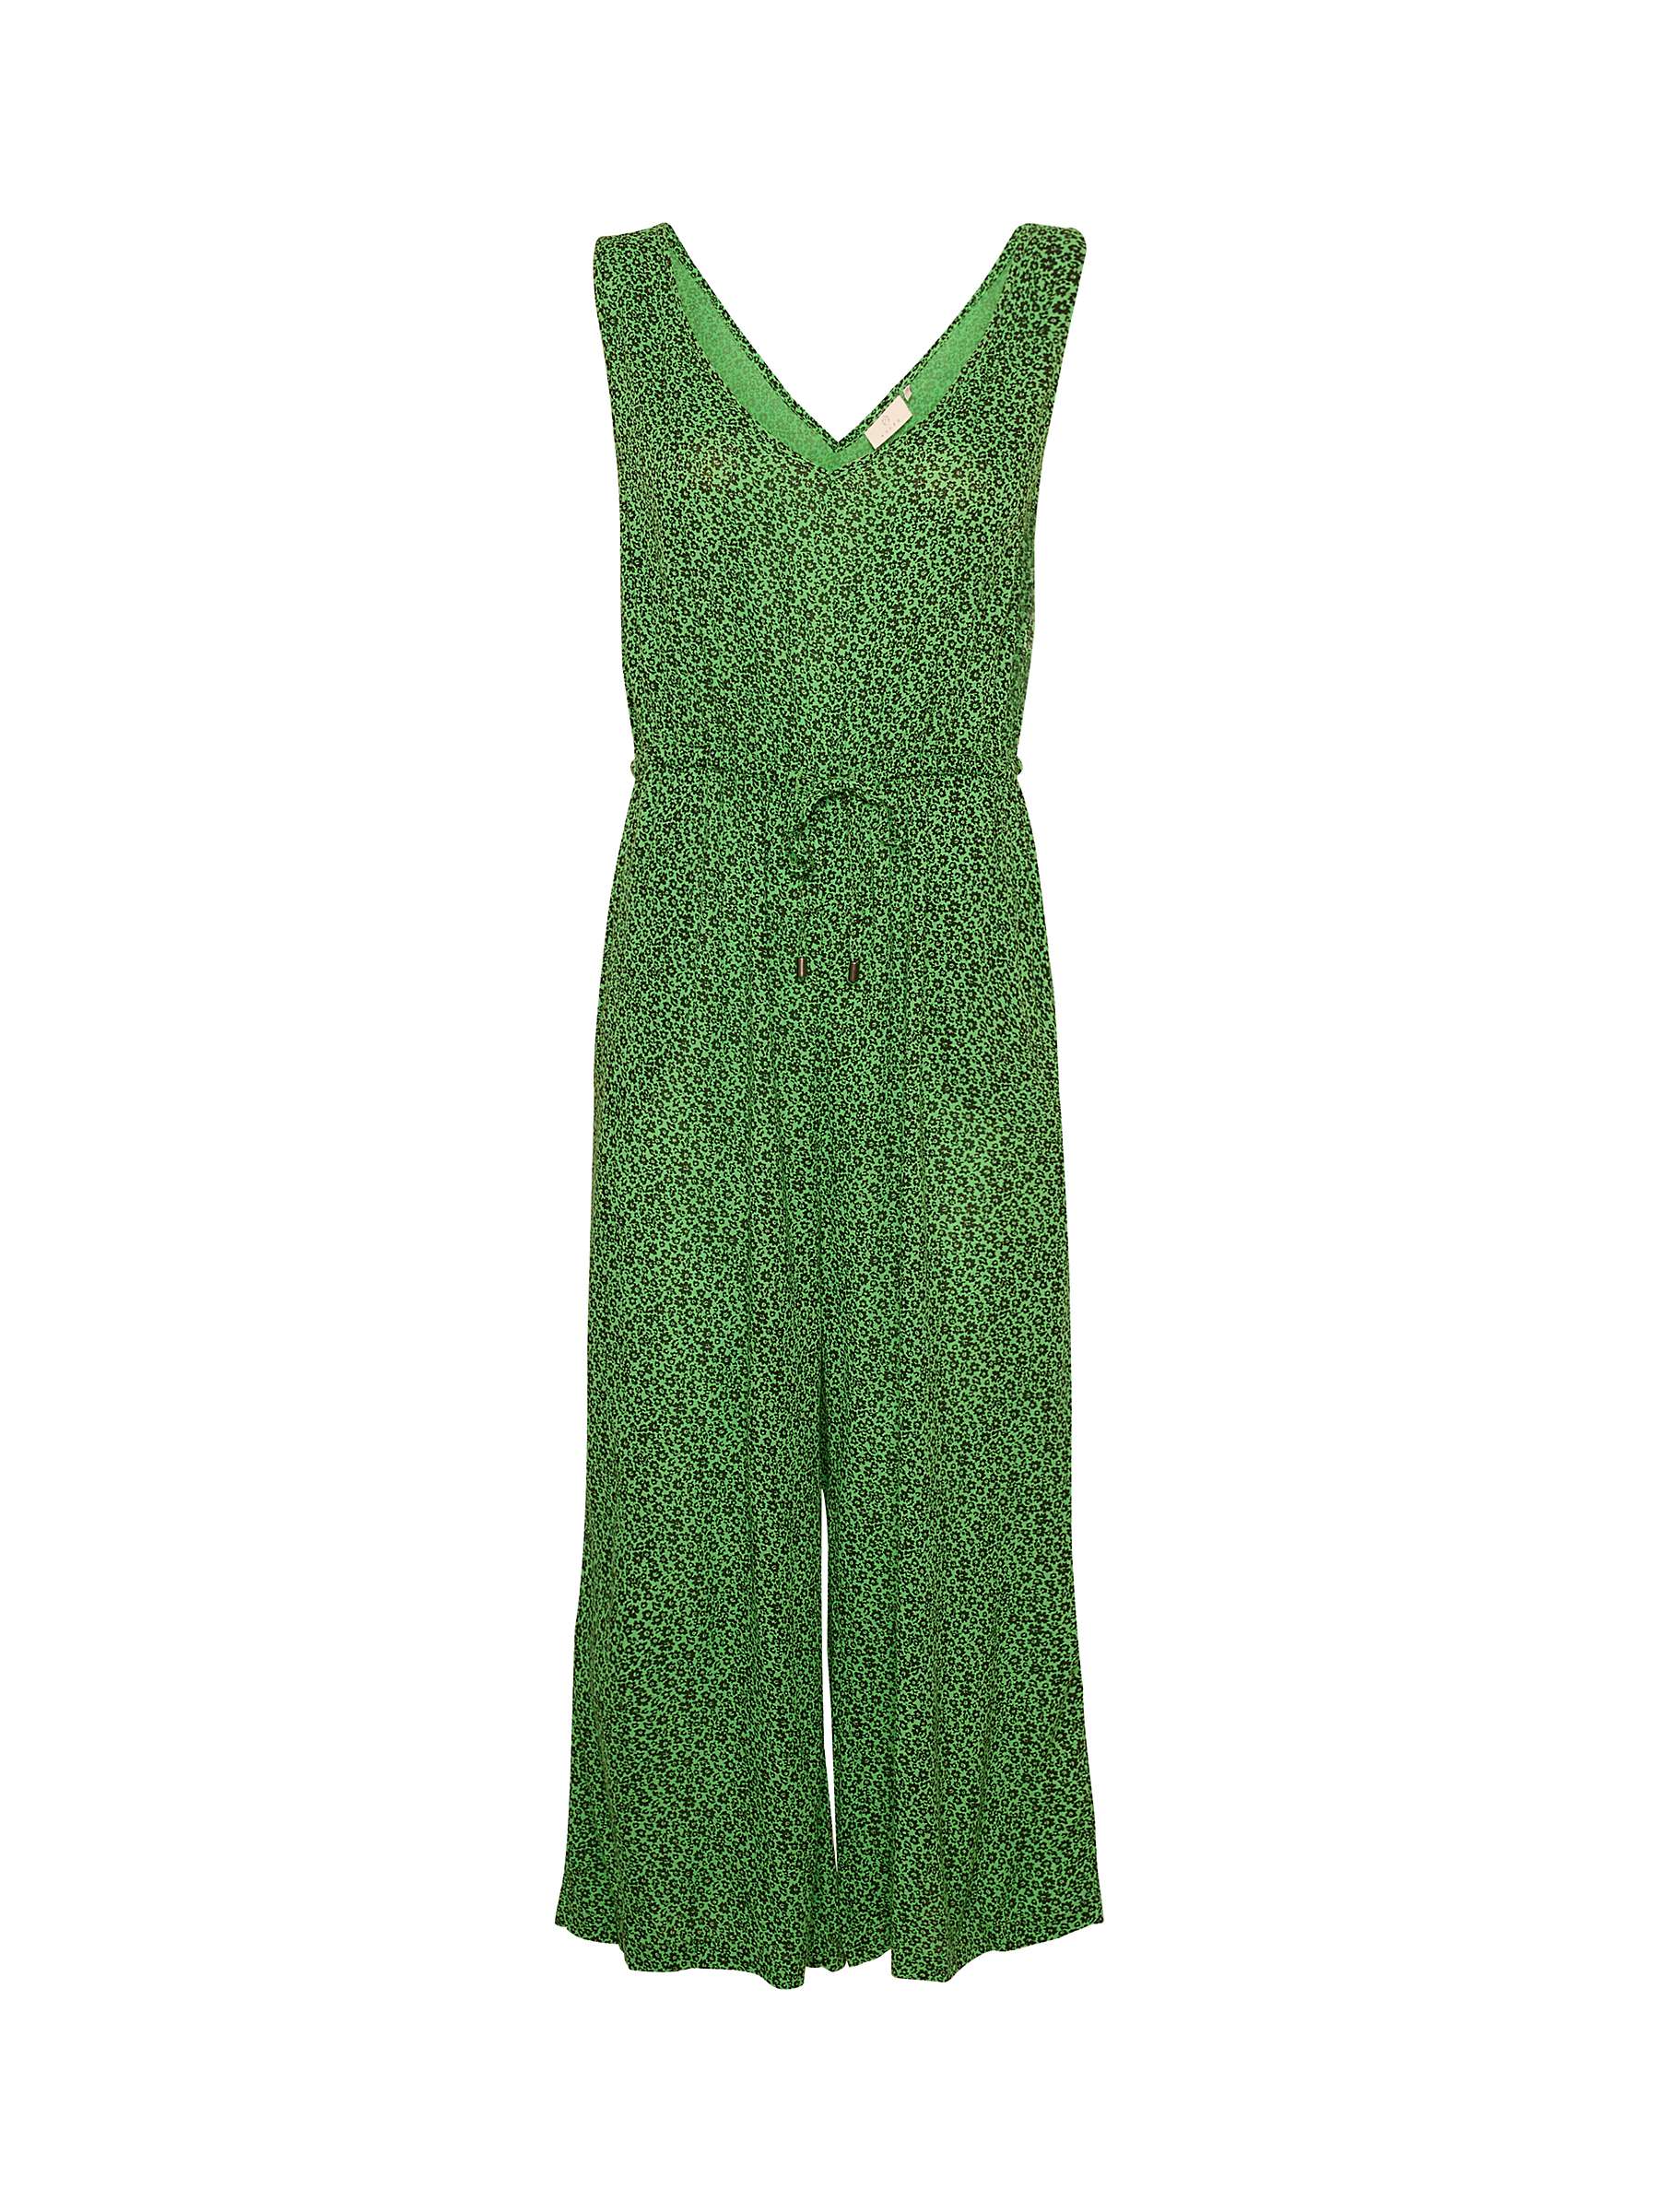 Buy KAFFE Isolde Ditsy Floral Sleeveless Jumpsuit, Poison Green Online at johnlewis.com